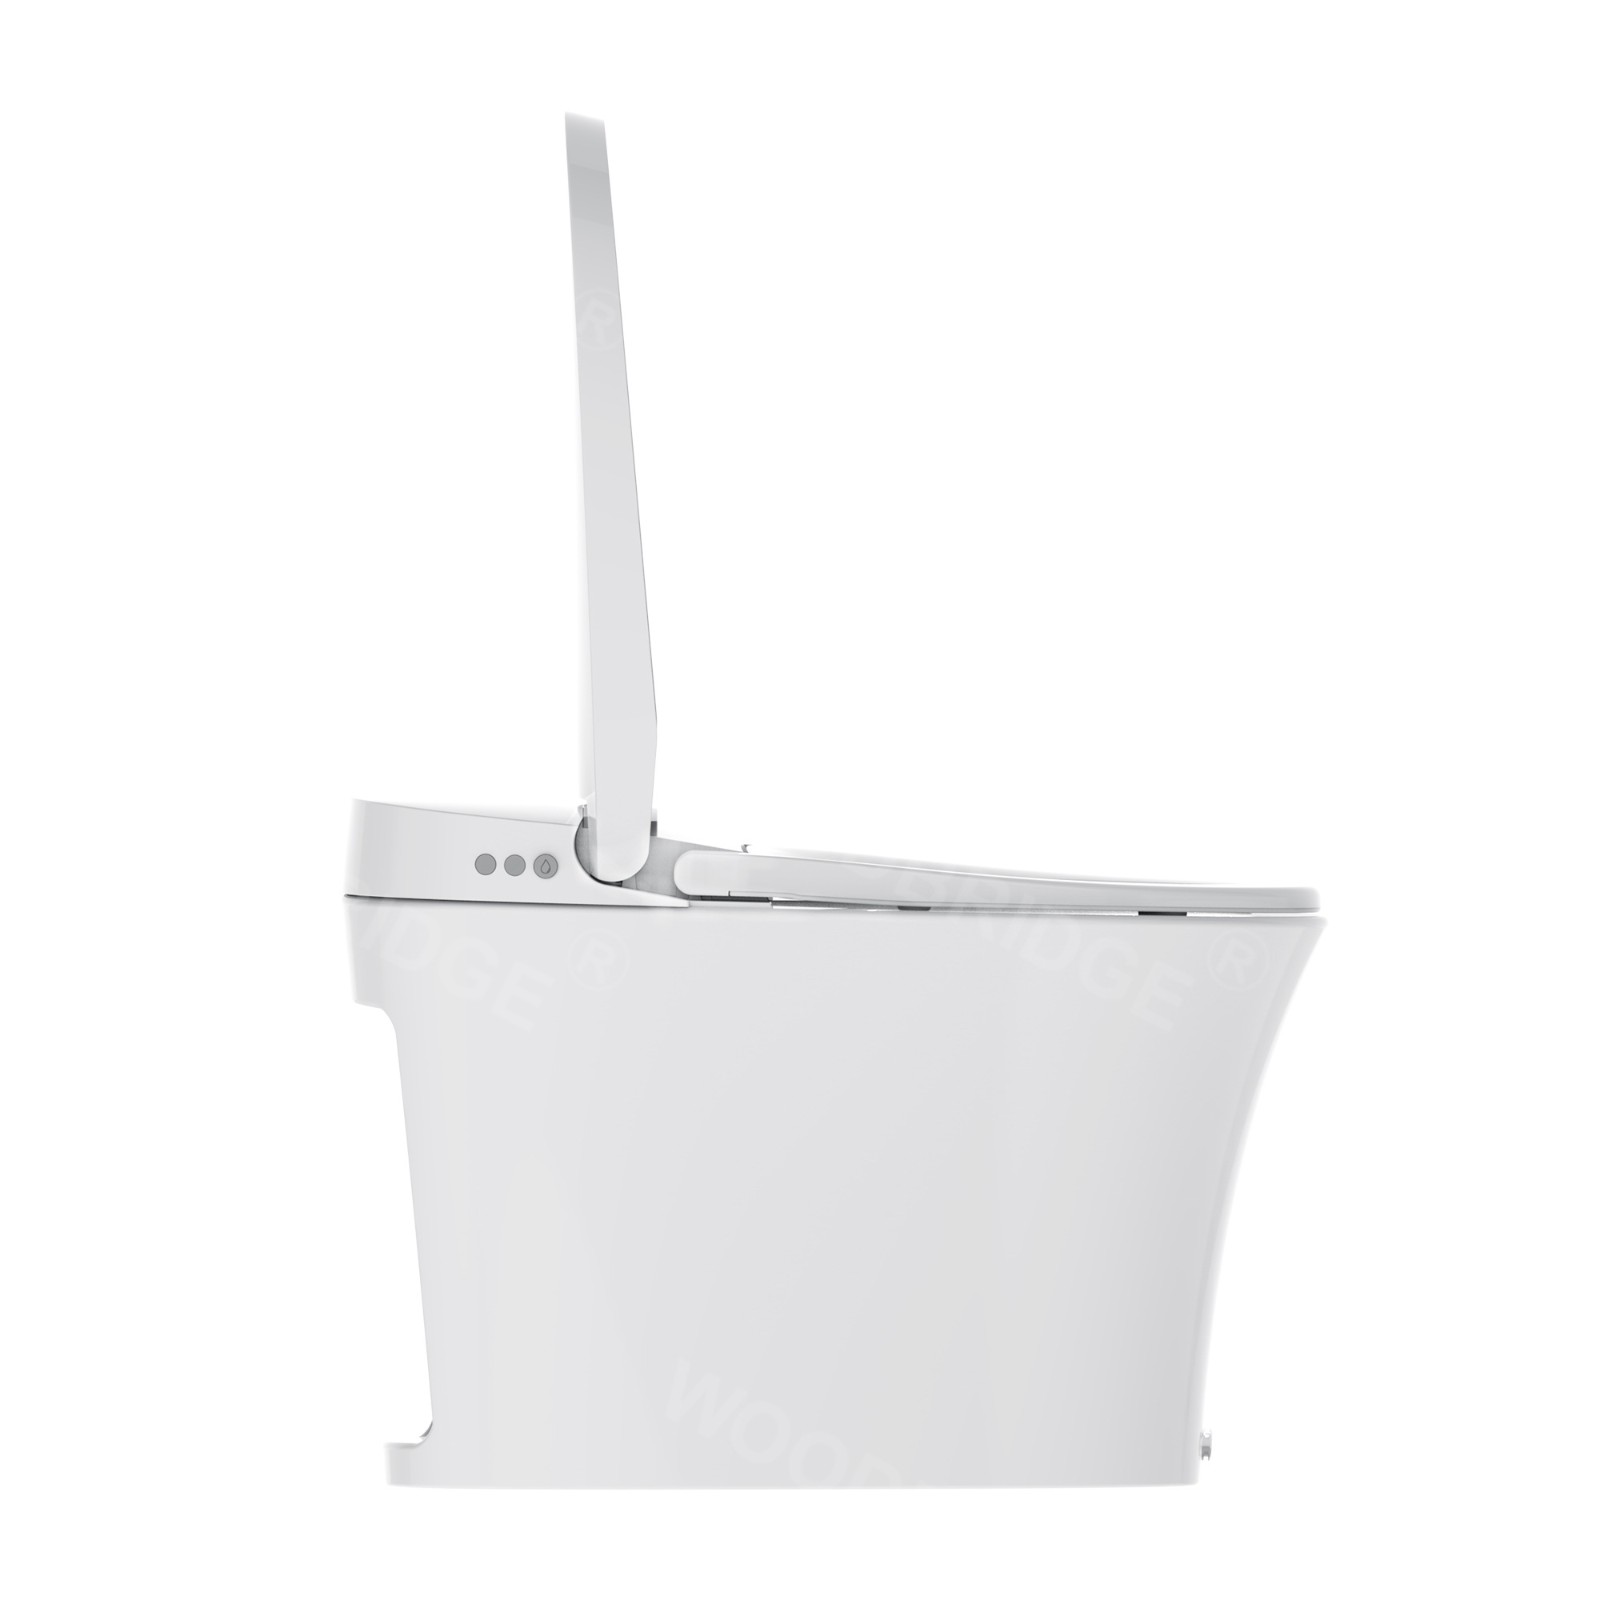  WOODBRIDGE BW5100S One Piece Modern,Slim, Tankless and High Efficiency Toilet with Battery Operated Auto Flushing_5058